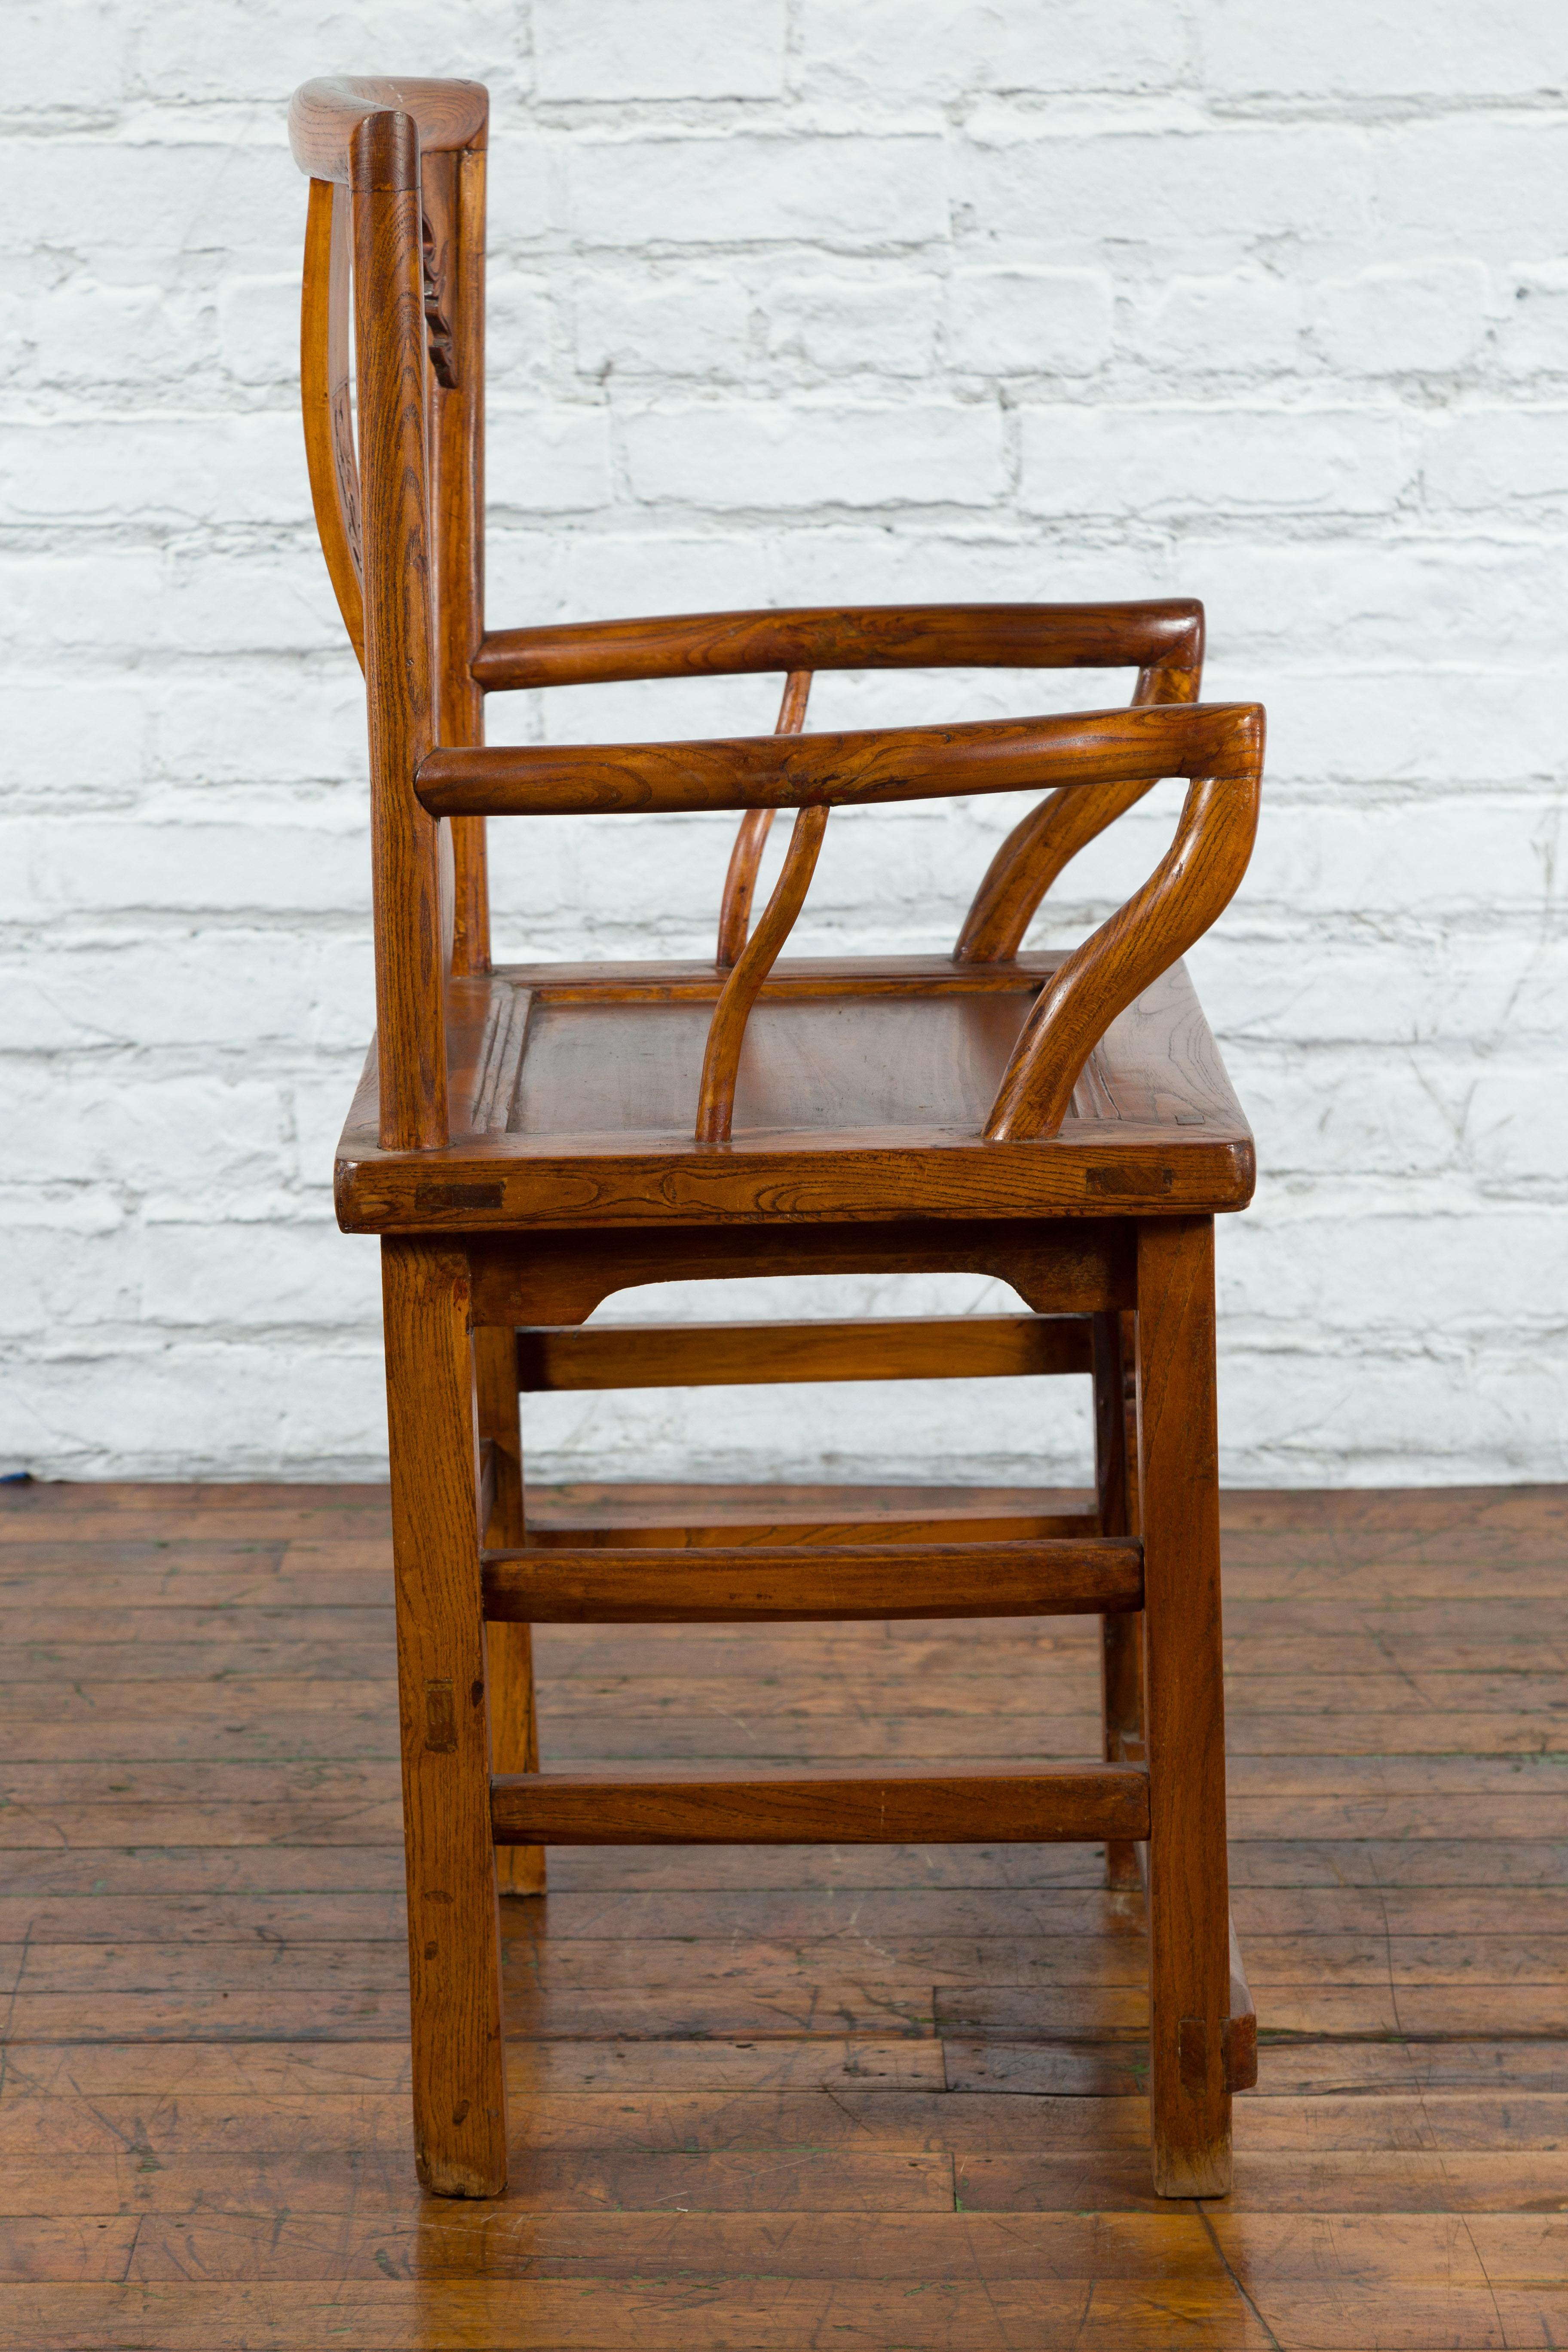 Chinese 19th Century Qing Chair with Open Arms and Hand-Carved Floral Motifs For Sale 2